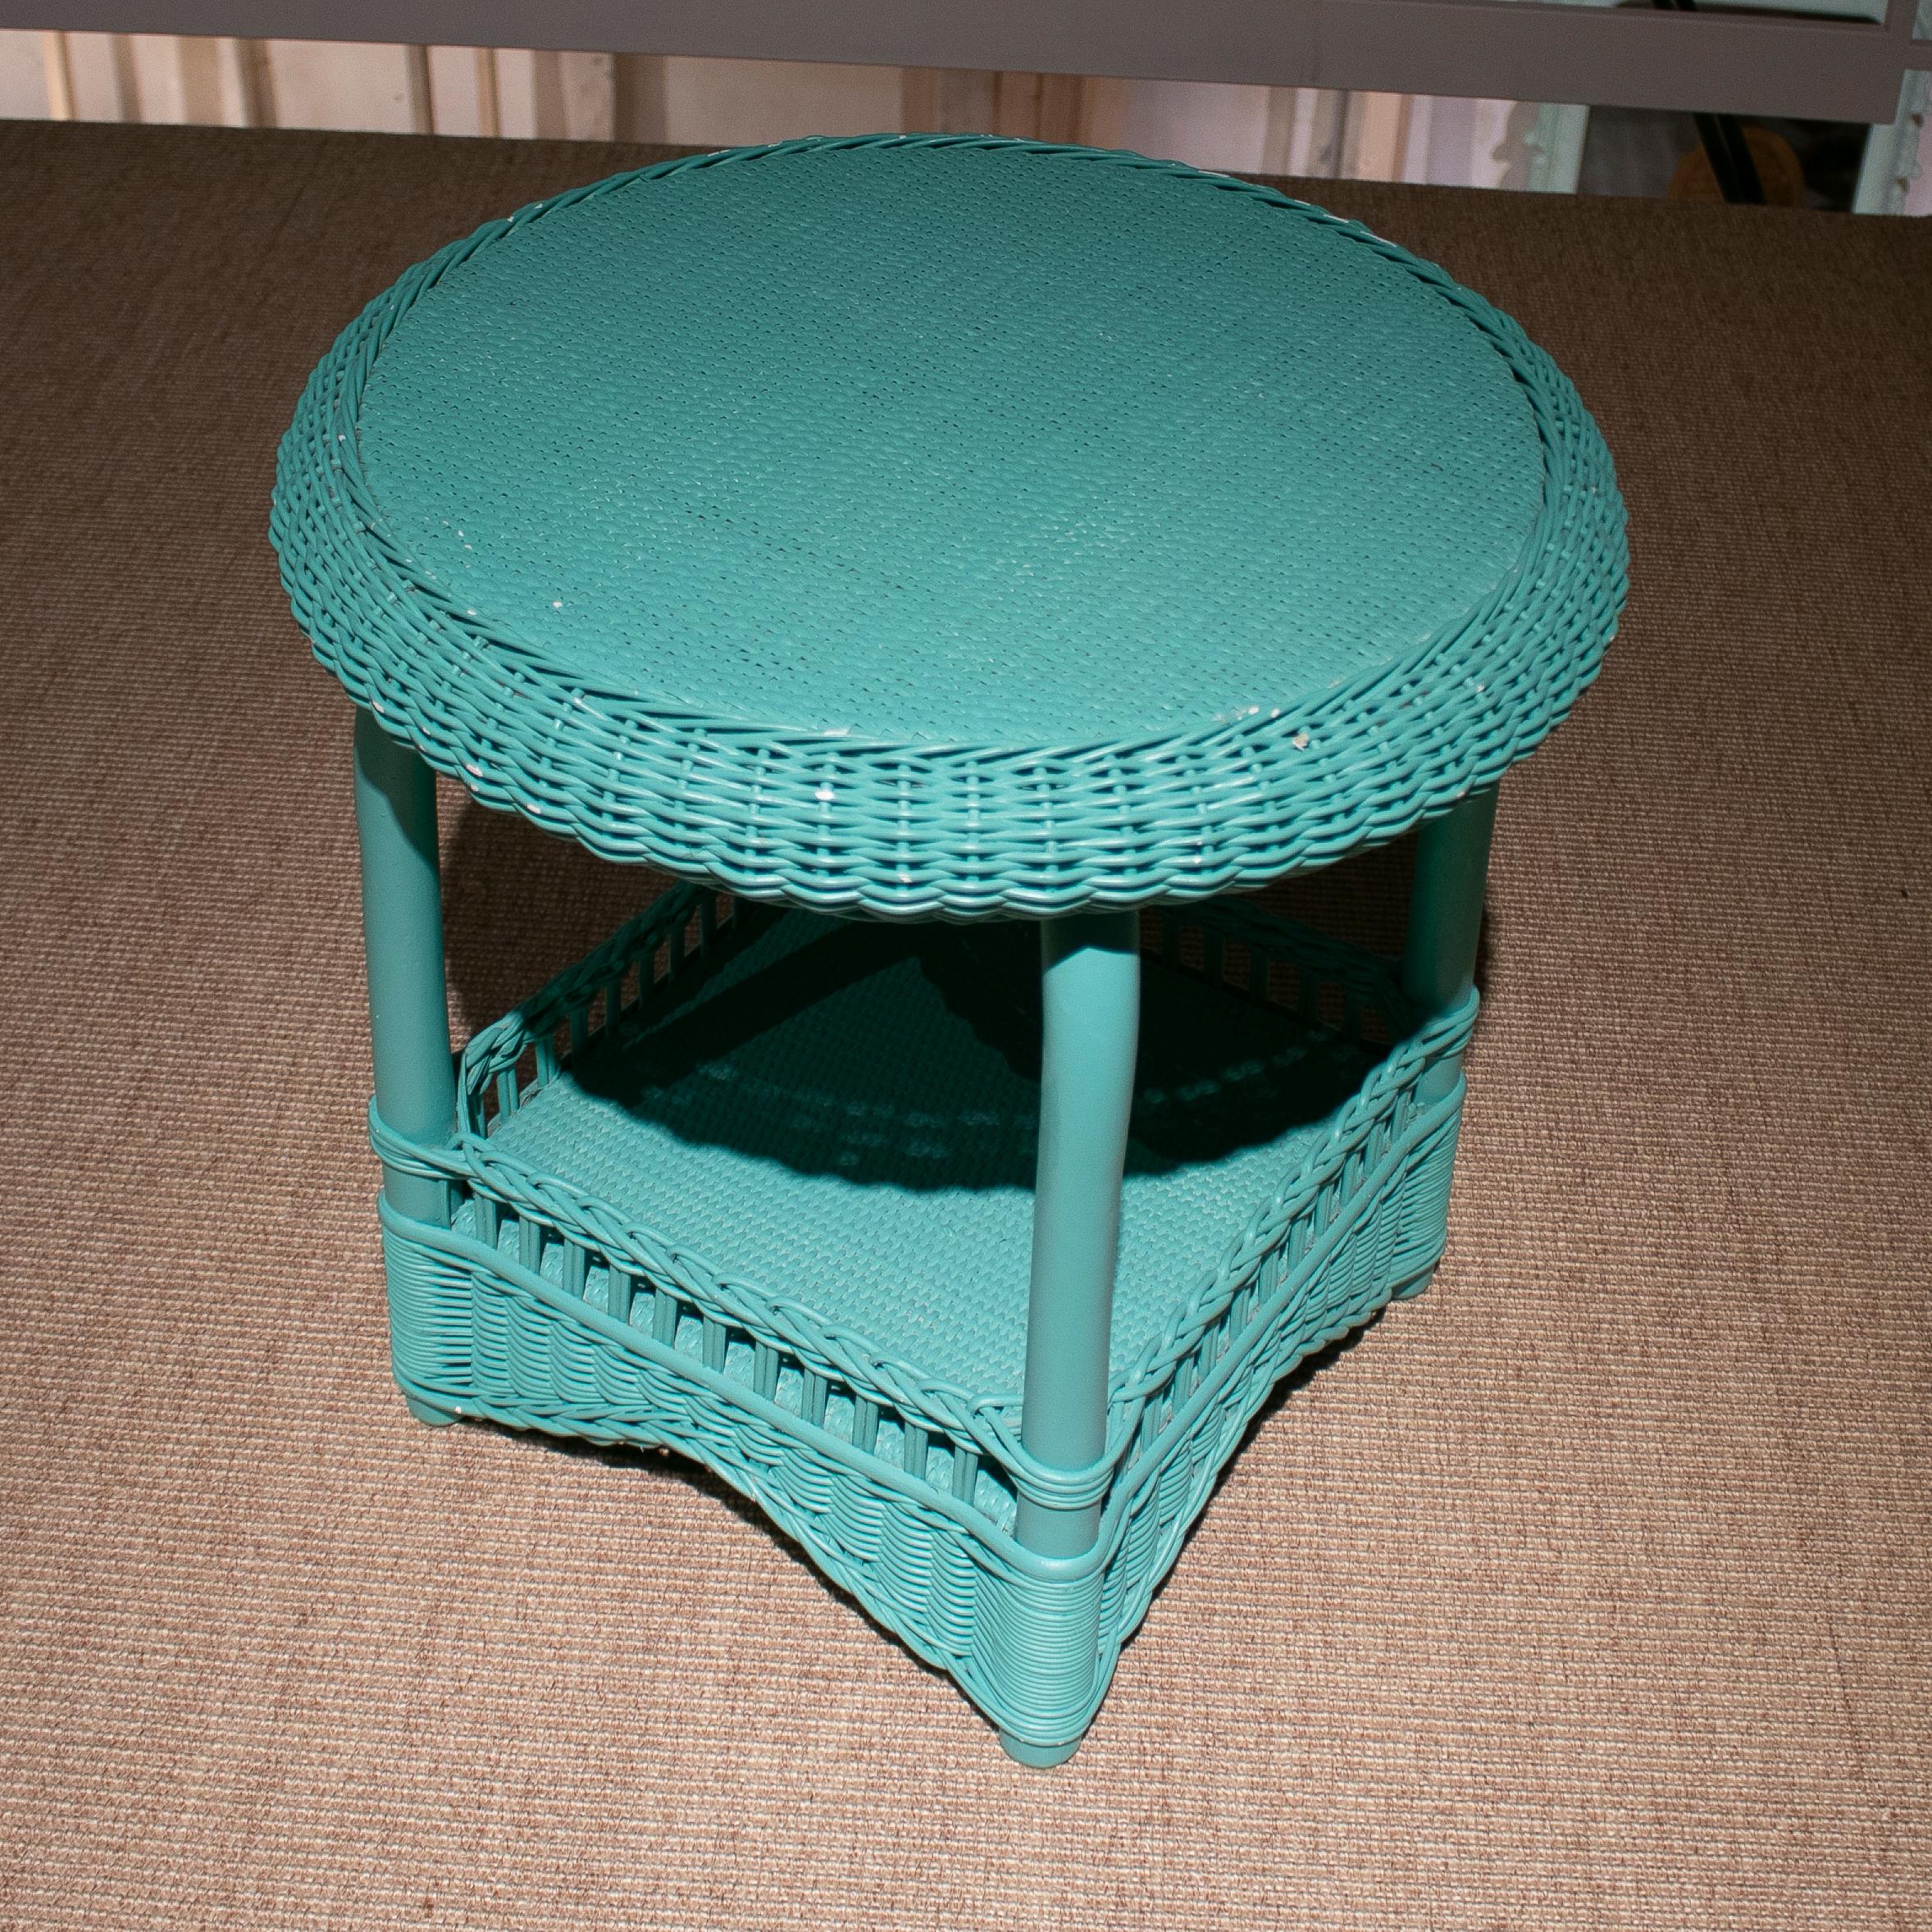 Vintage 1980s Spanish turquoise lacquered hand woven wicker round side table.